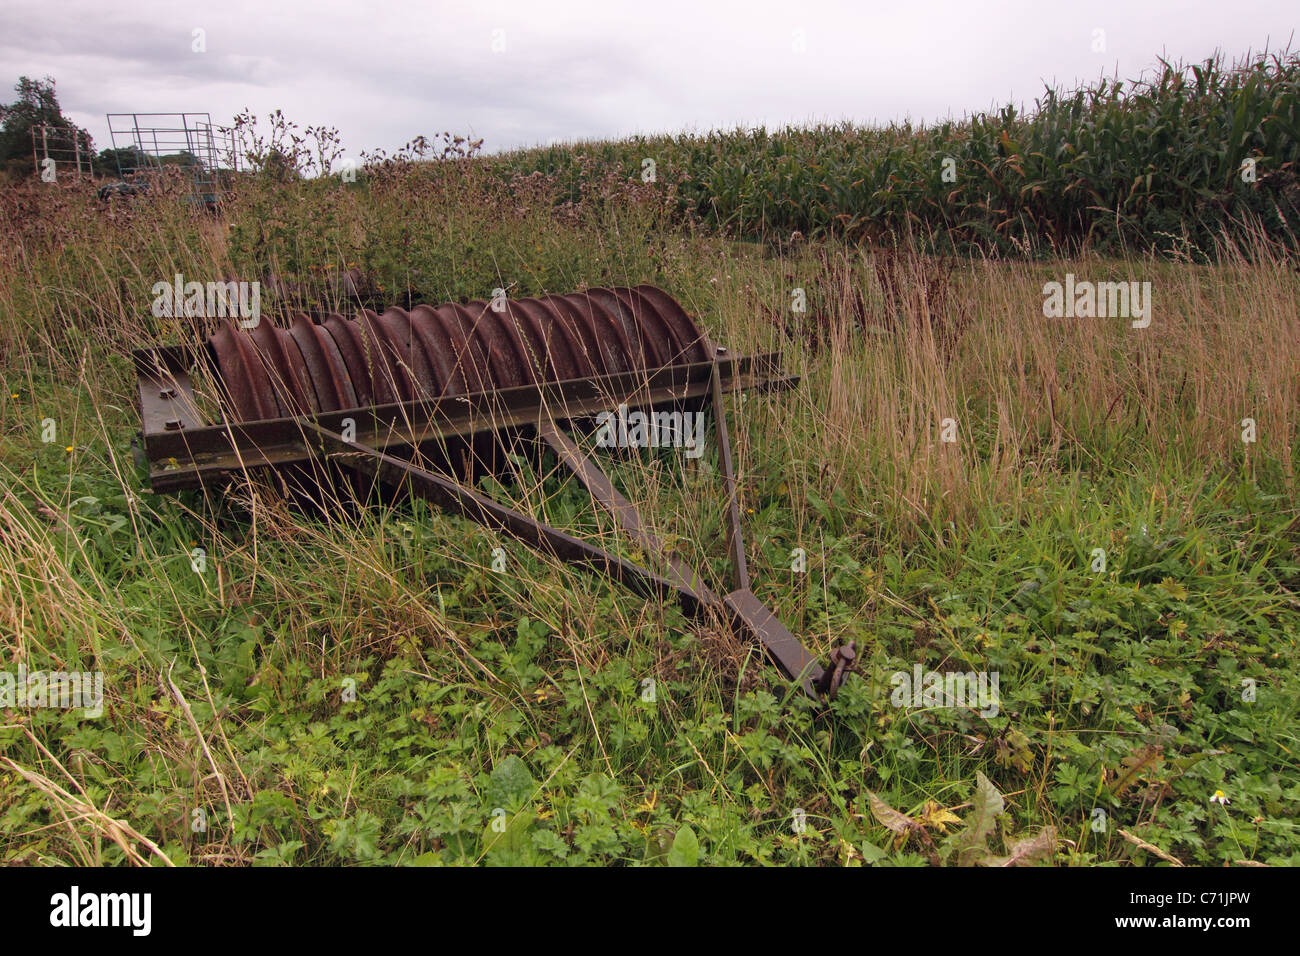 Old Overgrown farm machinery lying derelict in a field Stock Photo